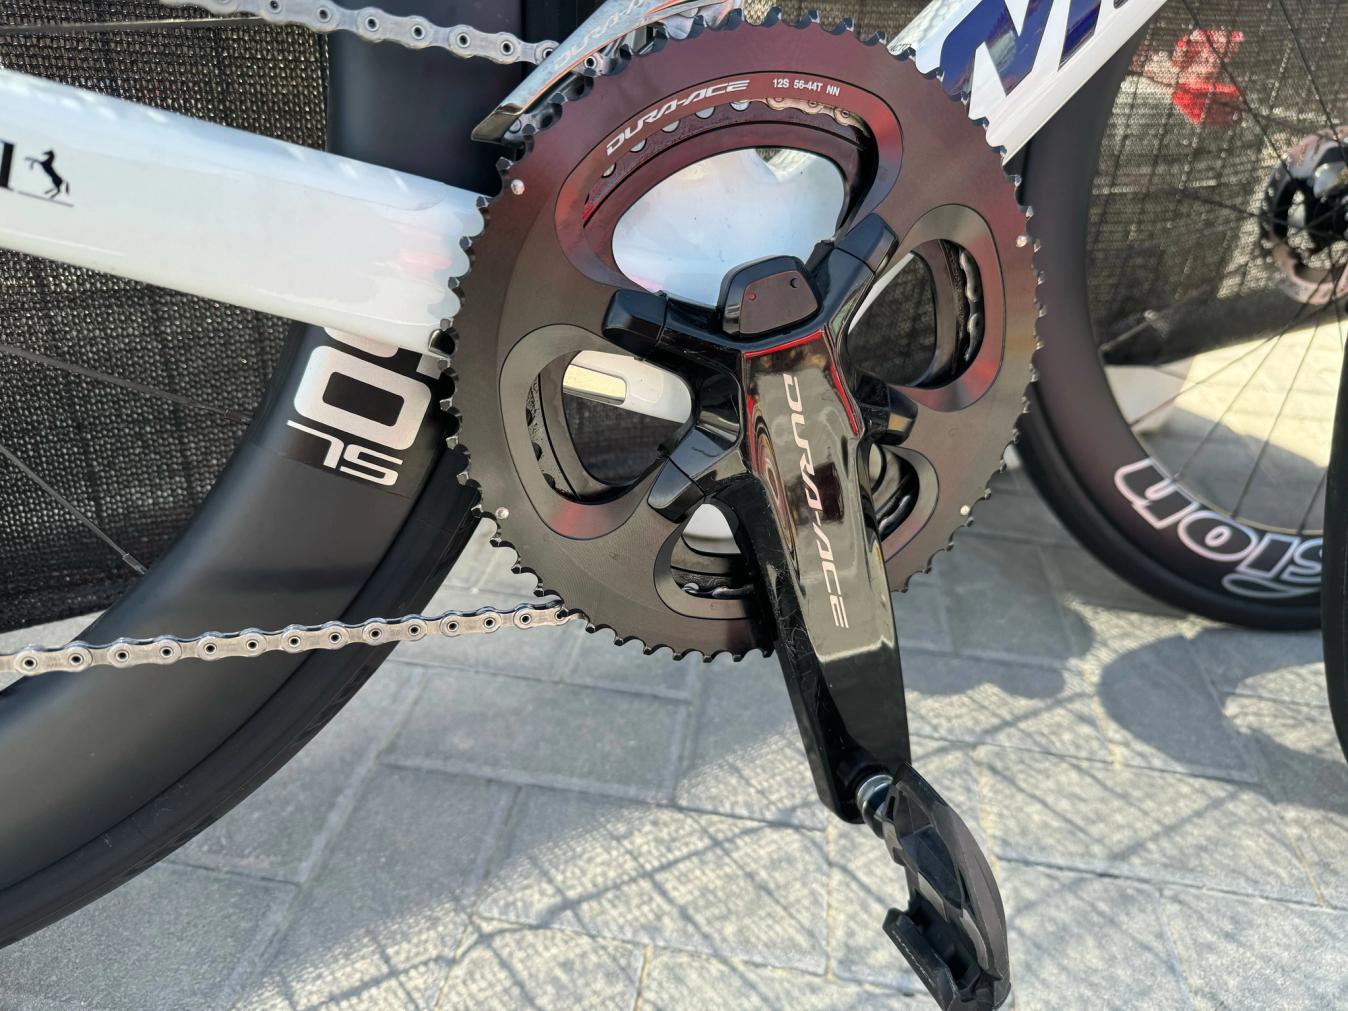 The Shimano Dura-Ace 56/44t set-up